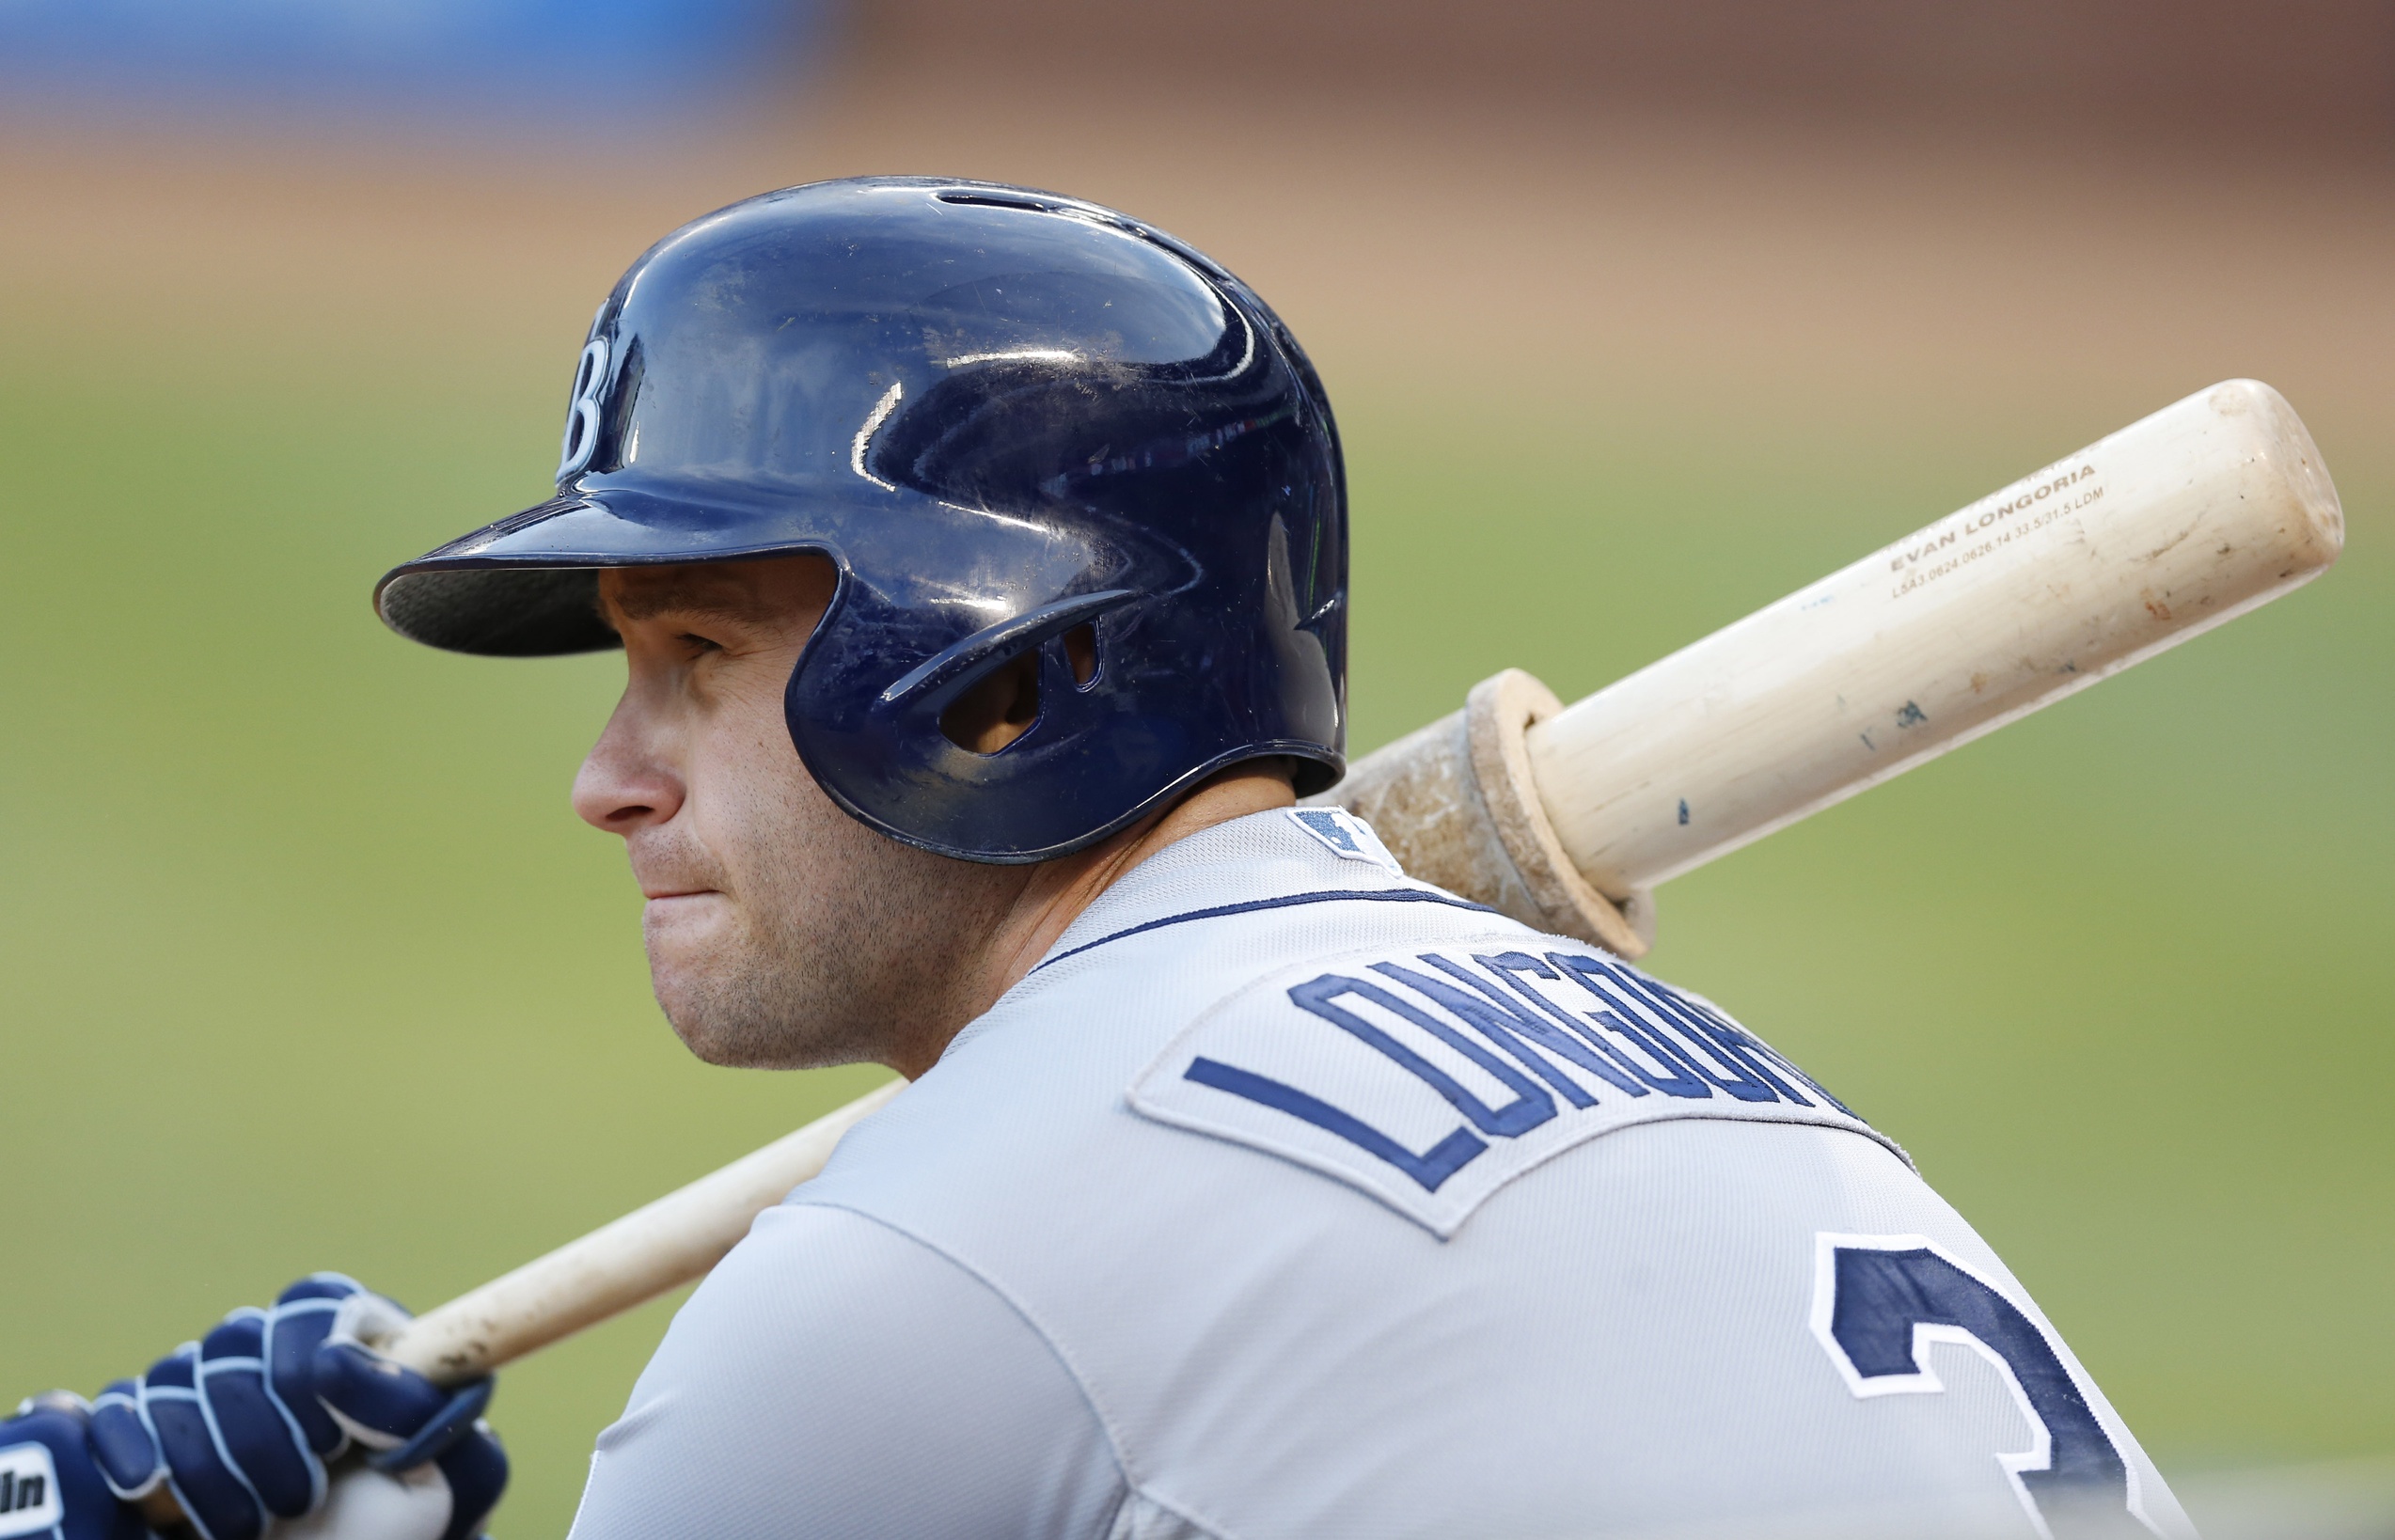 Evan Longoria may have played his last game with the Tampa Bay Rays